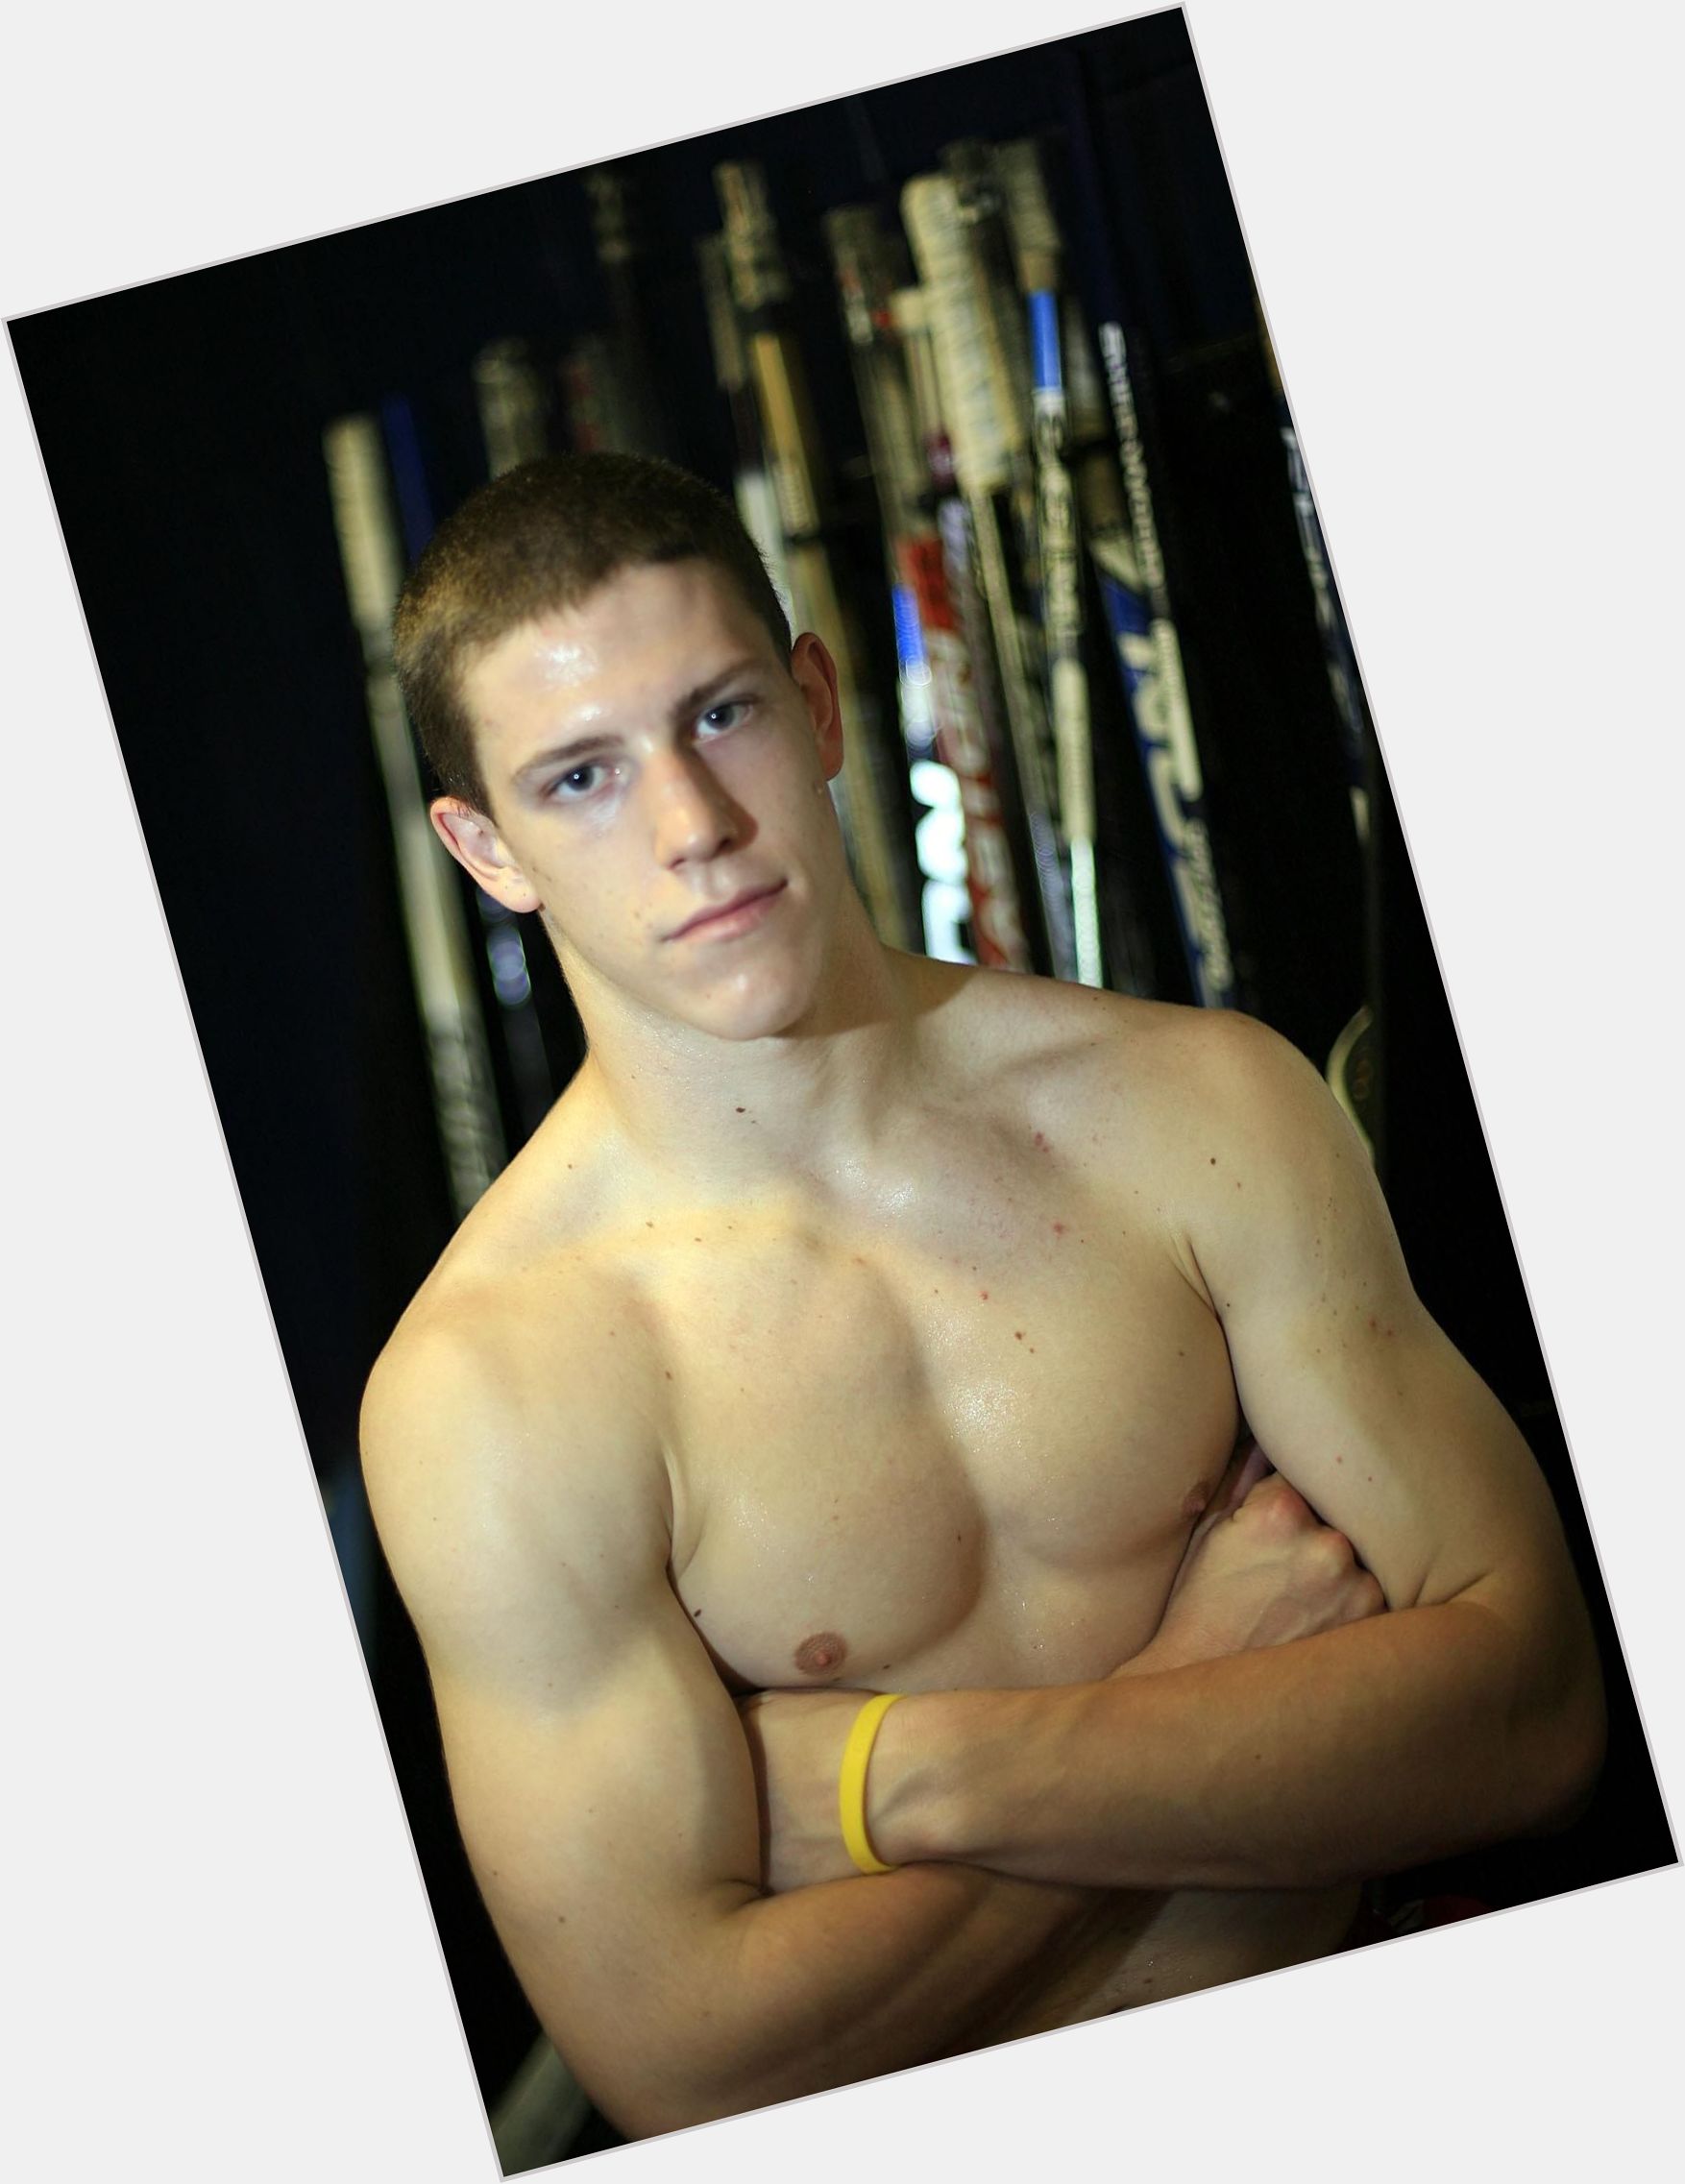 Https://fanpagepress.net/m/C/Charlie Coyle Dating 2